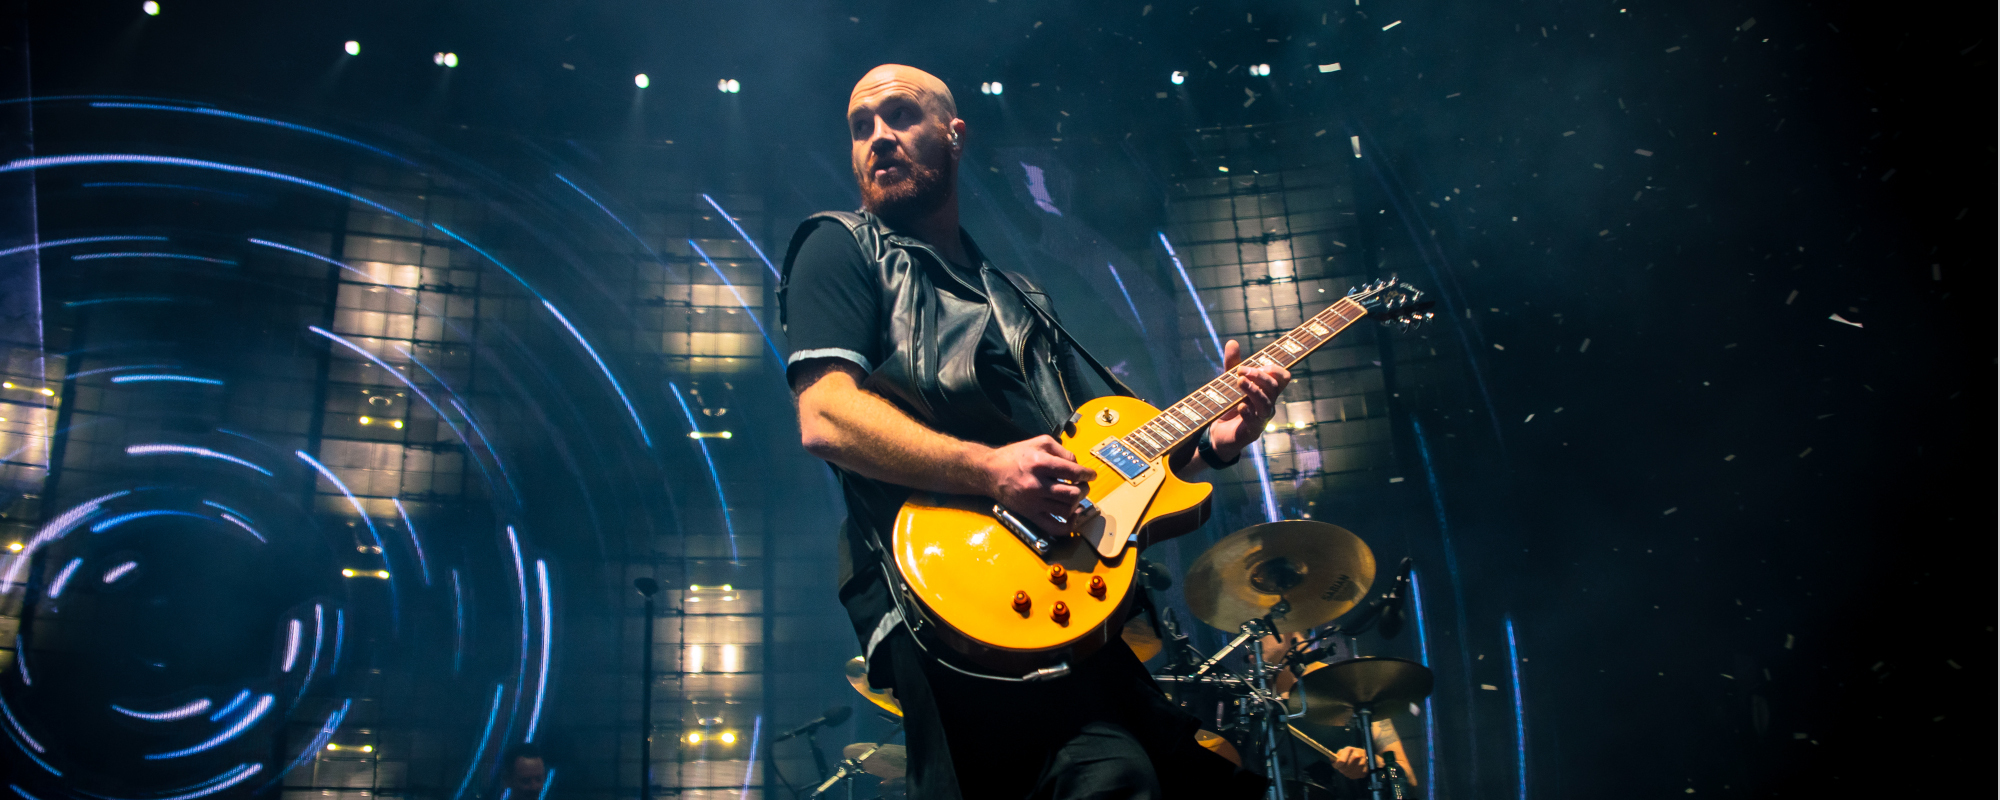 Mark Sheehan, Guitarist for The Script, Dead at 46